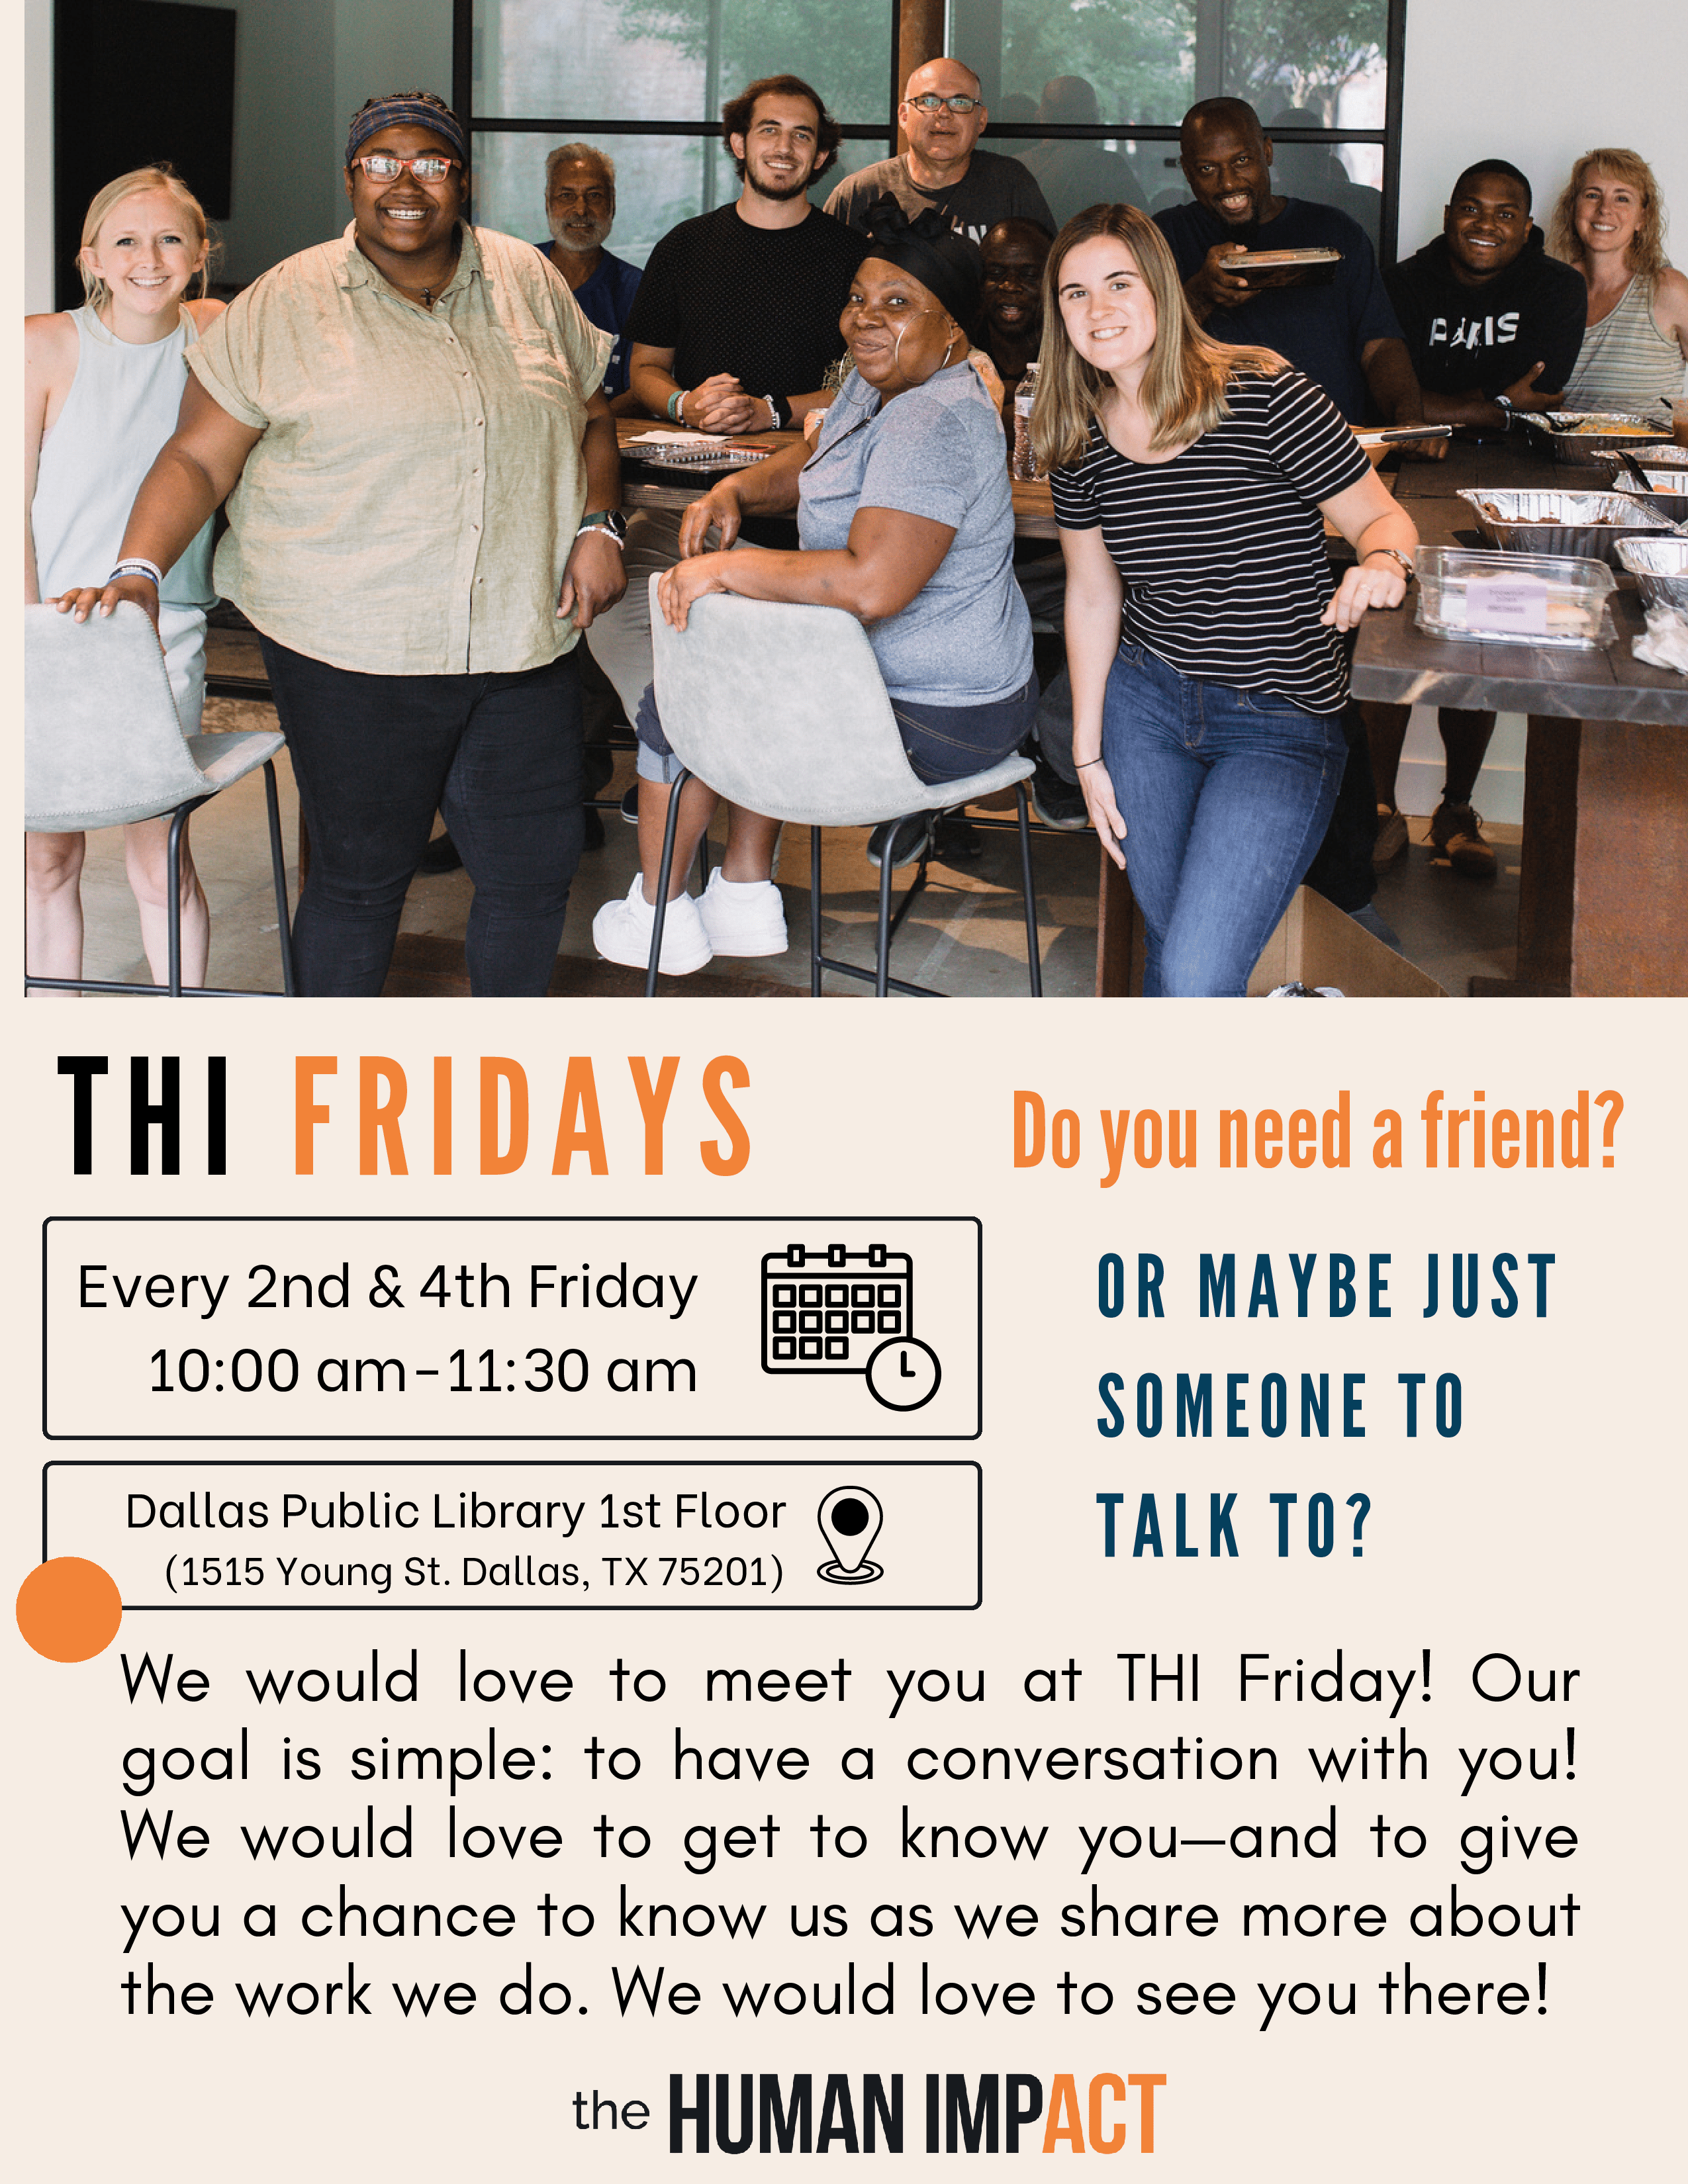 The Human Impact presents THI Fridays. We would love to meet you at THI Friday! Our goal is simple: to have a conversation with you! We would love to get to know you—and to give you a chance to know us as we share more about the work we do. We would love to see you there! Held every 2nd and 4th Friday at the J Erik Jonsson on the 1st floor. 